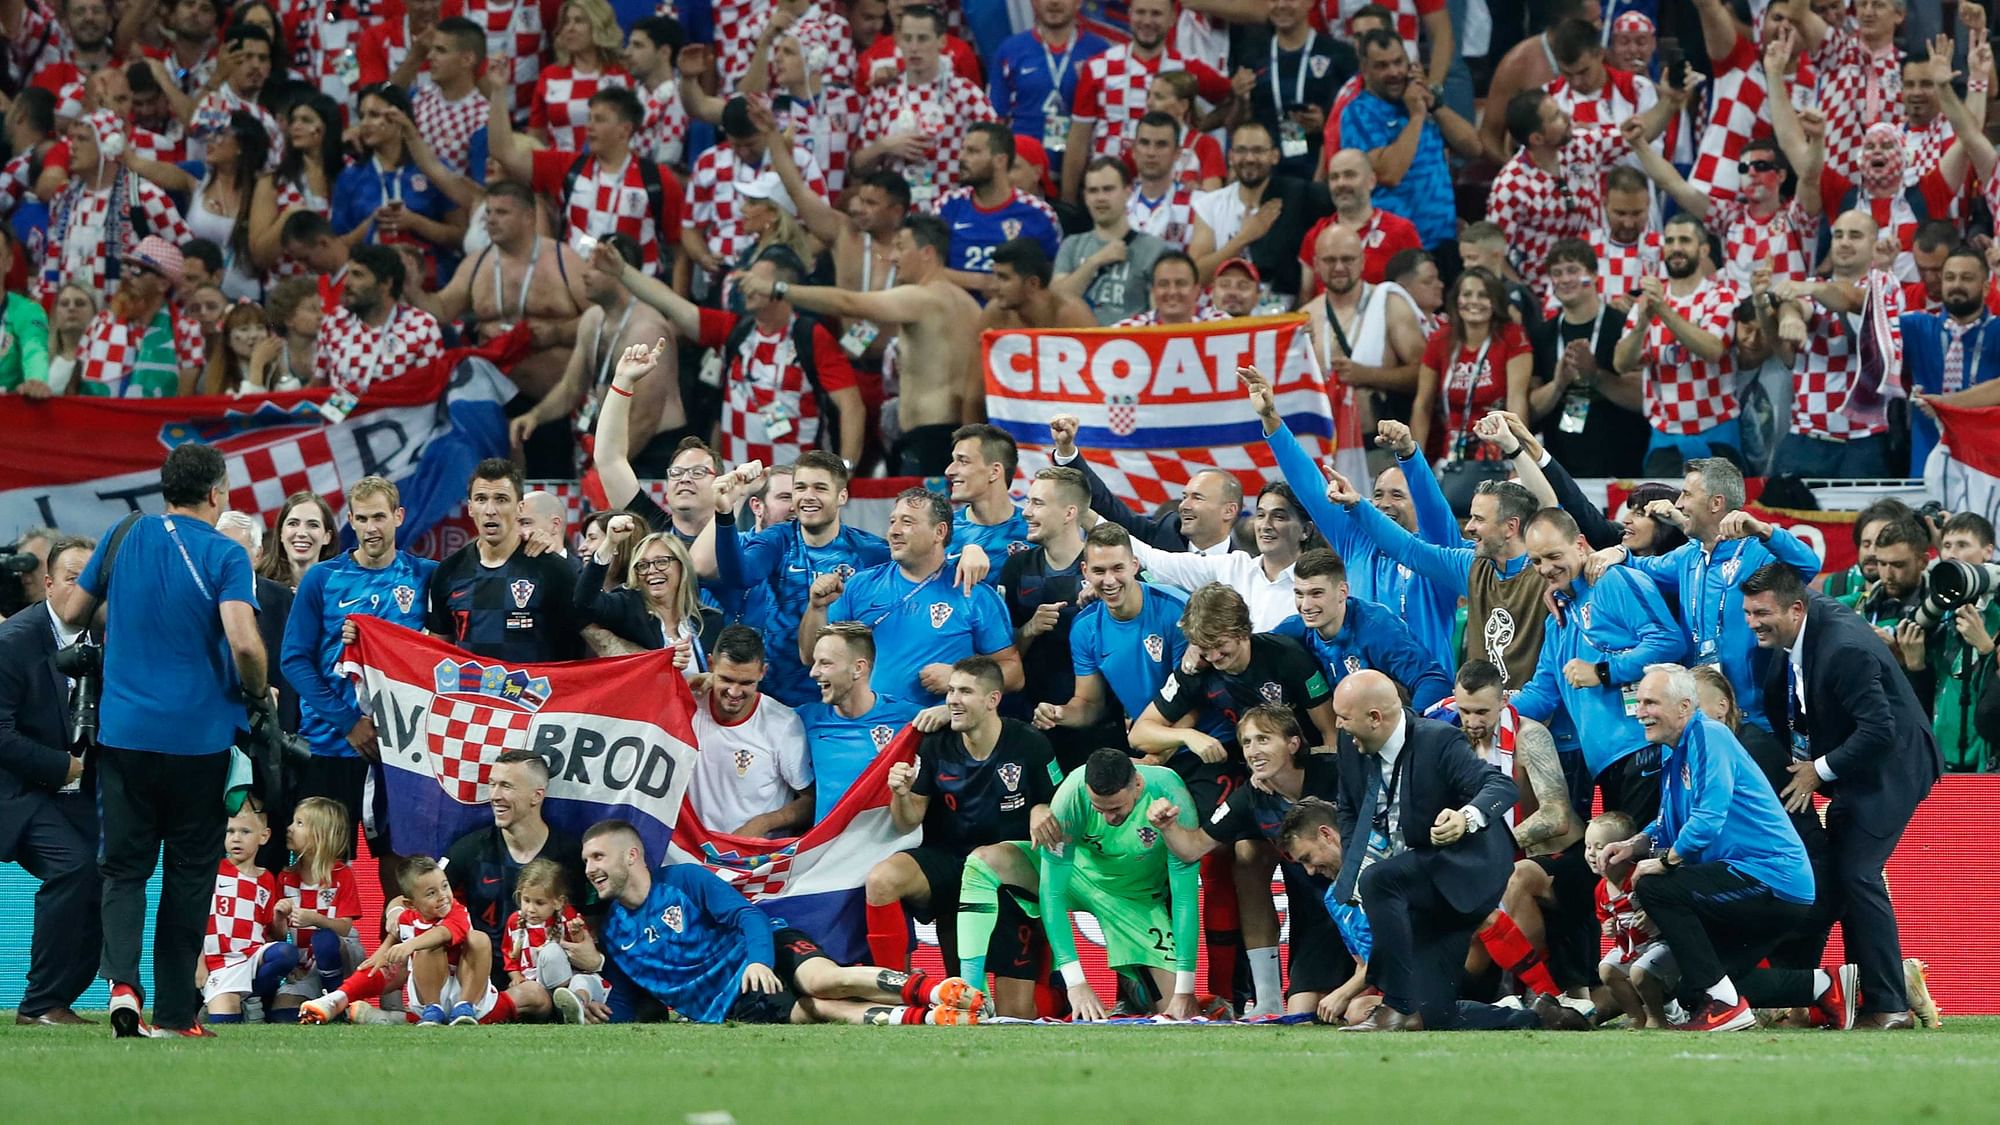 Croatia team celebrates at the end of the semifinal match between Croatia and England at the 2018 FIFA World Cup in the Luzhniki Stadium in Moscow, Russia, Wednesday, July 11, 2018.&nbsp;